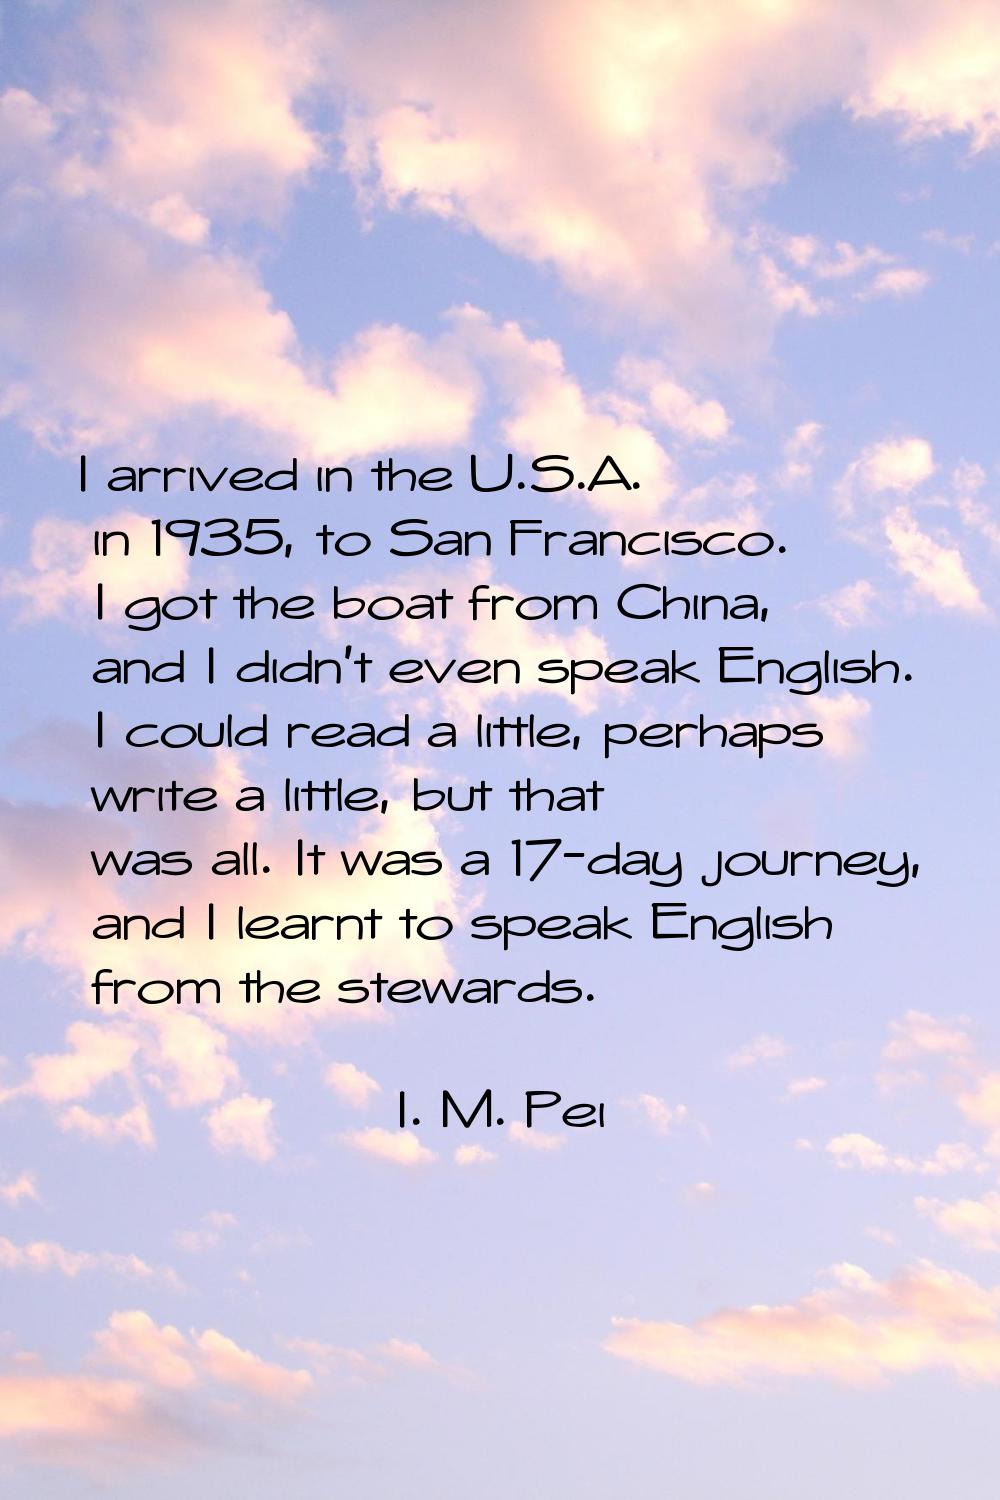 I arrived in the U.S.A. in 1935, to San Francisco. I got the boat from China, and I didn't even spe